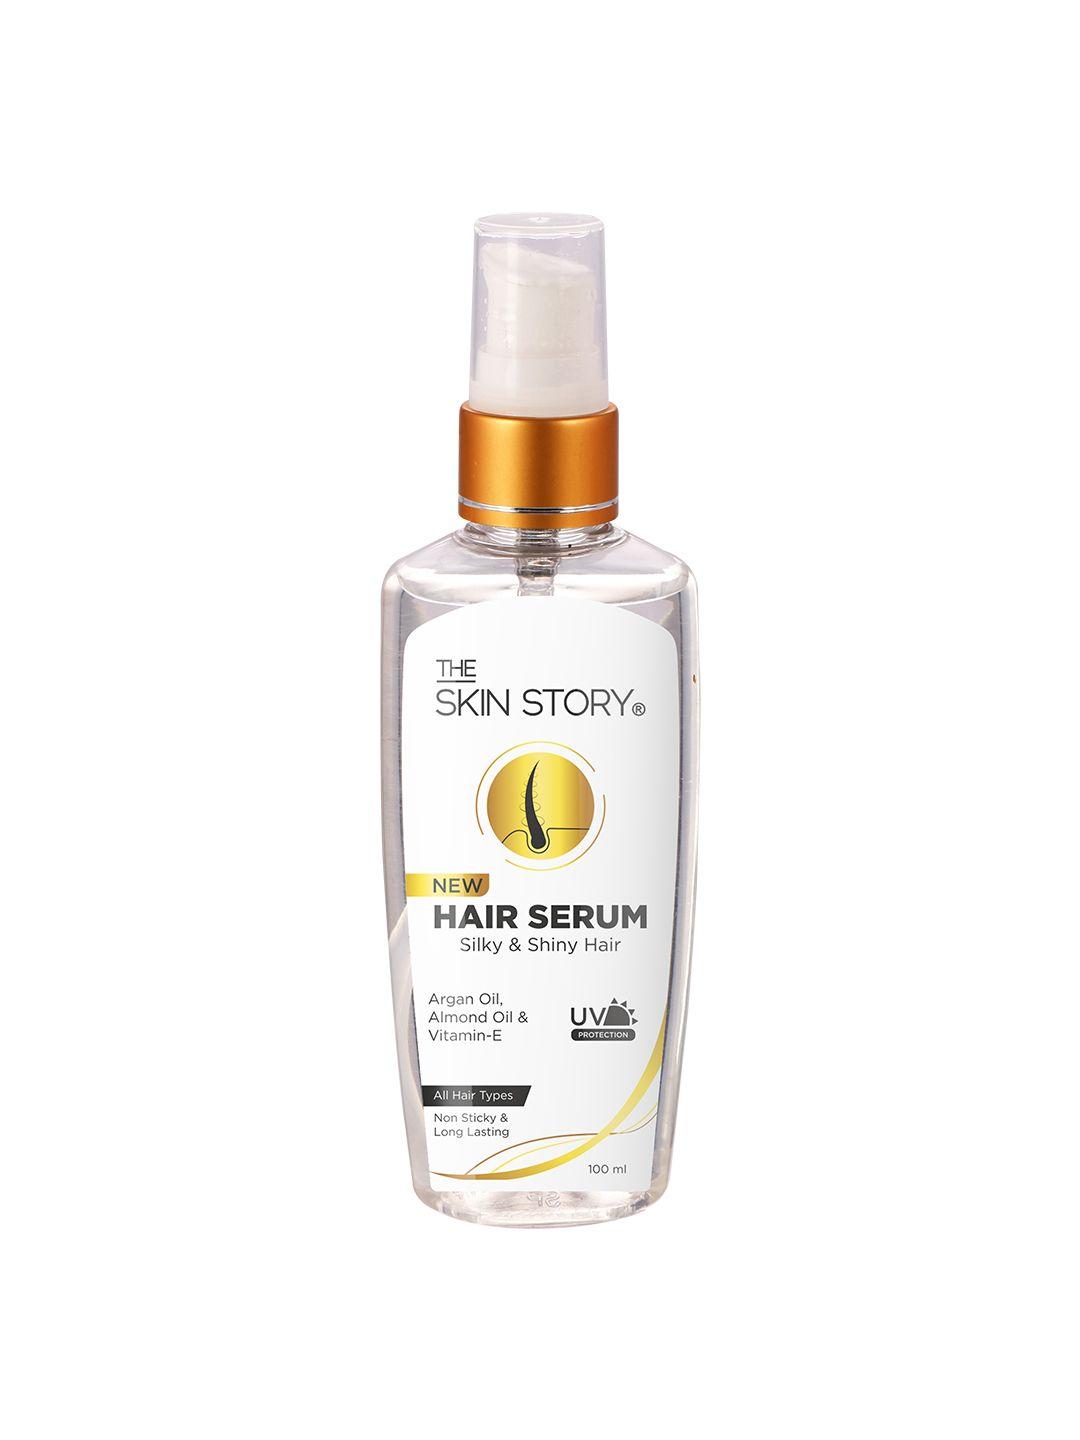 the skin story non sticky & uv protection hair serum with argan oil & almond oil - 100ml